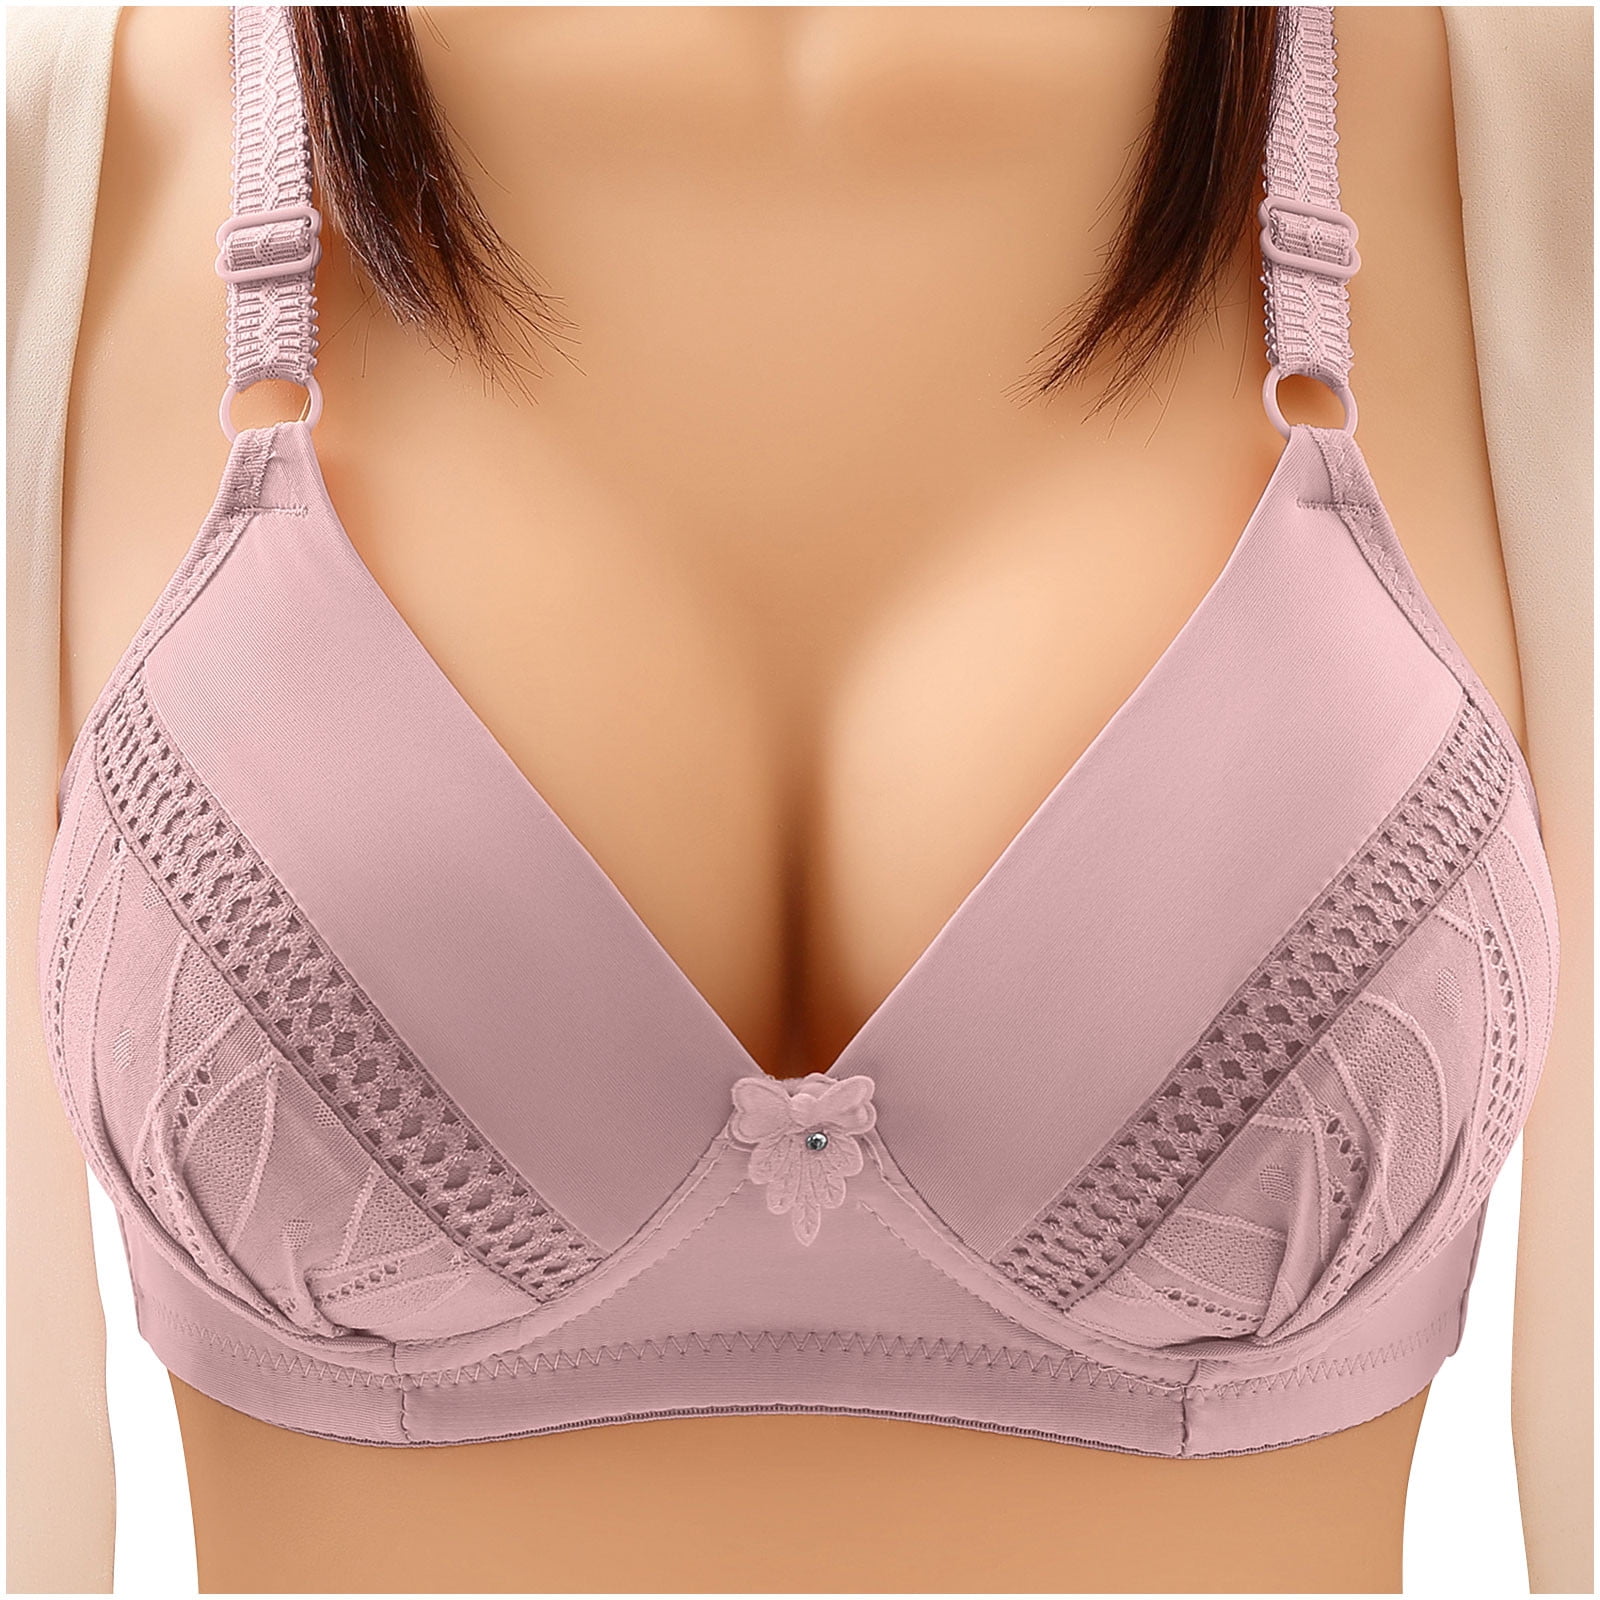 SBYOJLPB Womens Fashion Woman'S Solid Color Comfortable Hollow Out  Perspective Bra Underwear No Rims (Pink) 